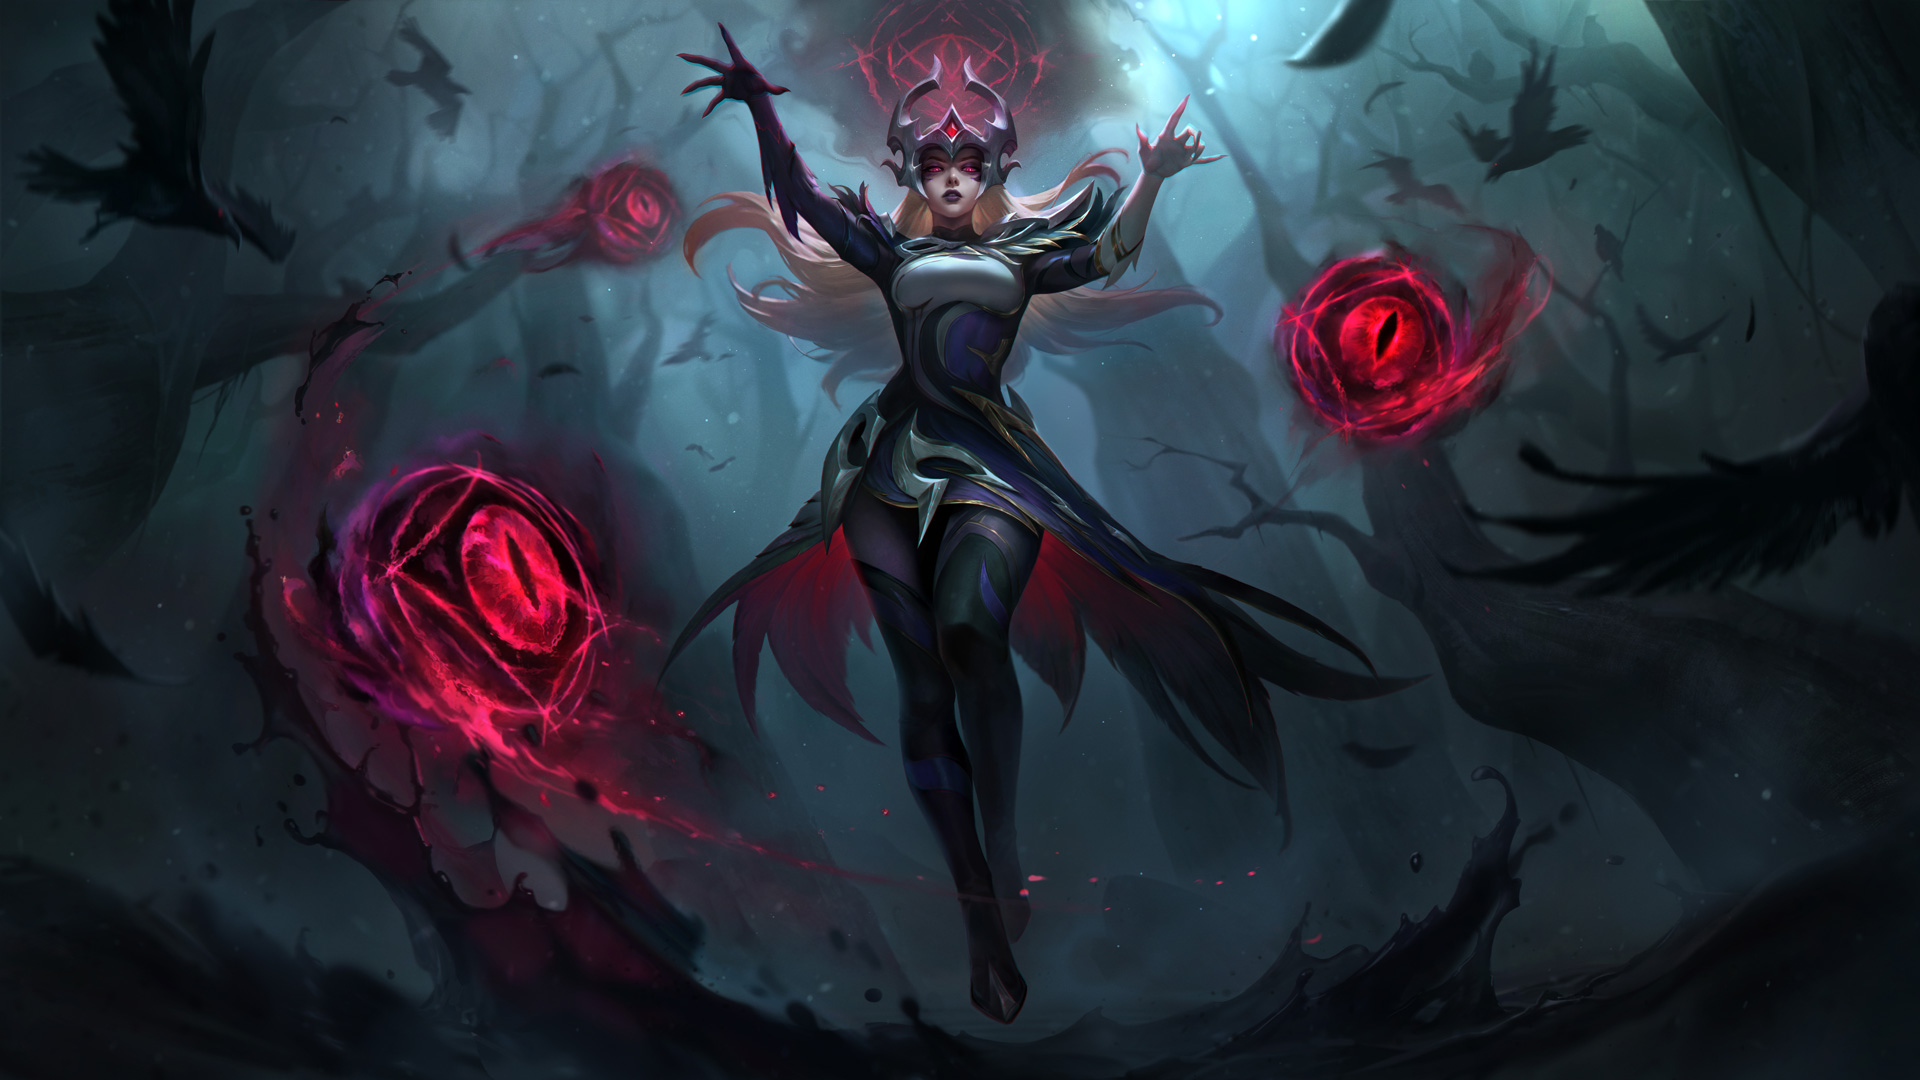 Coven Syndra (1350 RP)